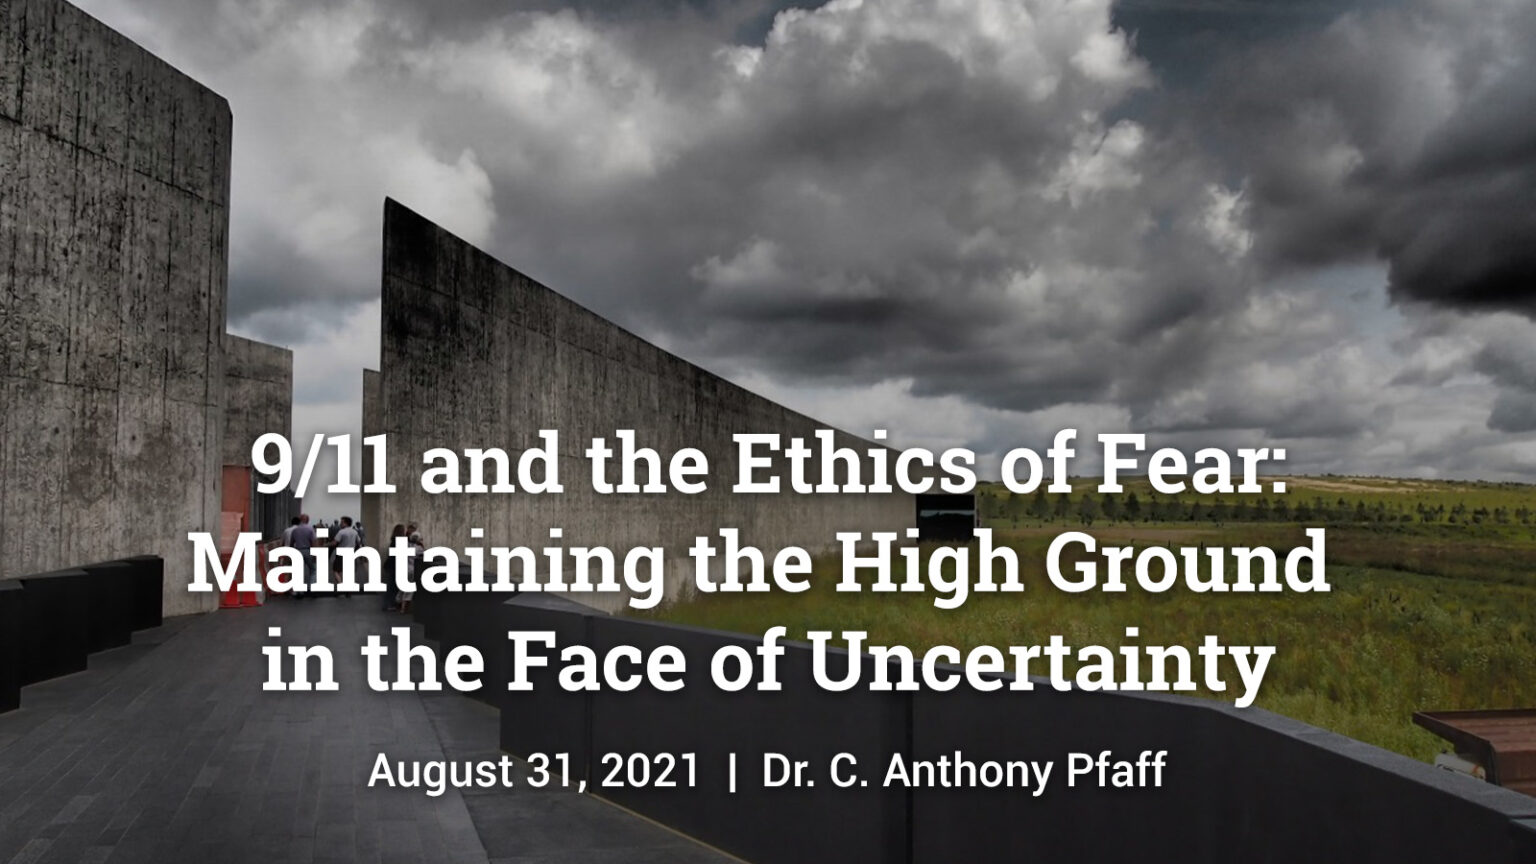  9/11 and the Ethics of Fear: Maintaining the High Ground in the Face of Uncertainty | Pfaff